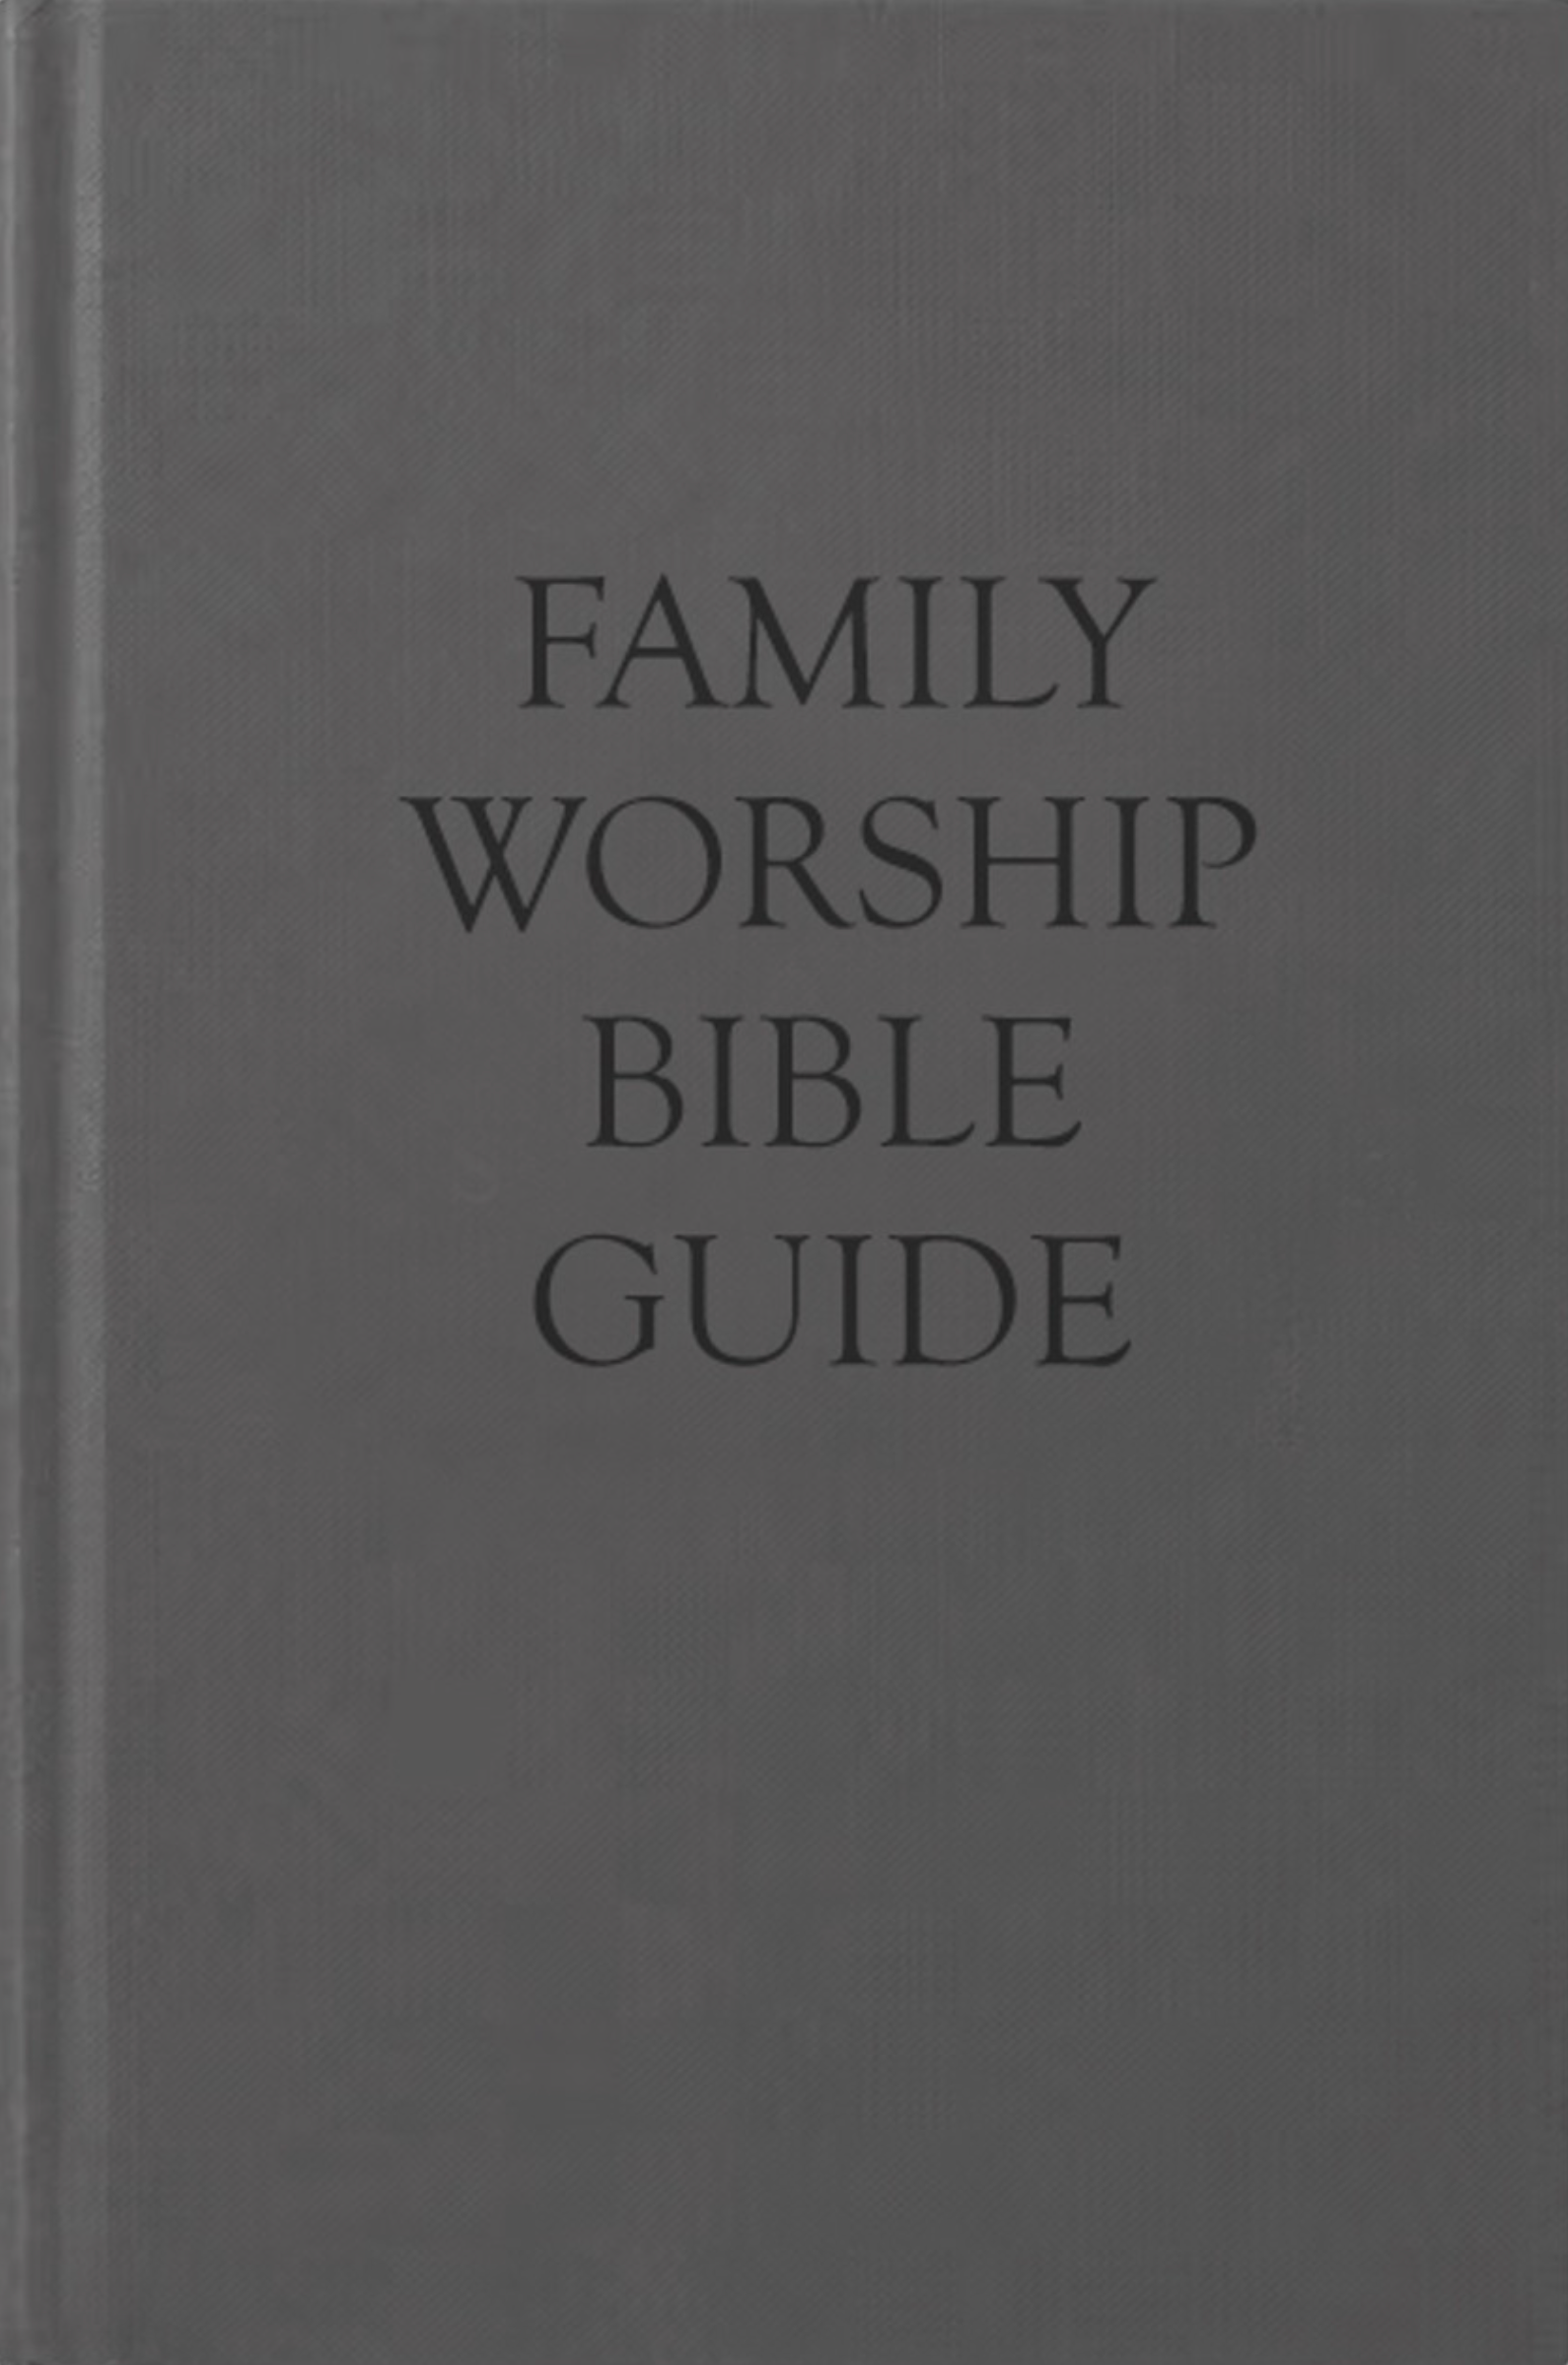 Image of Family Worship Bible Guide (Cloth)